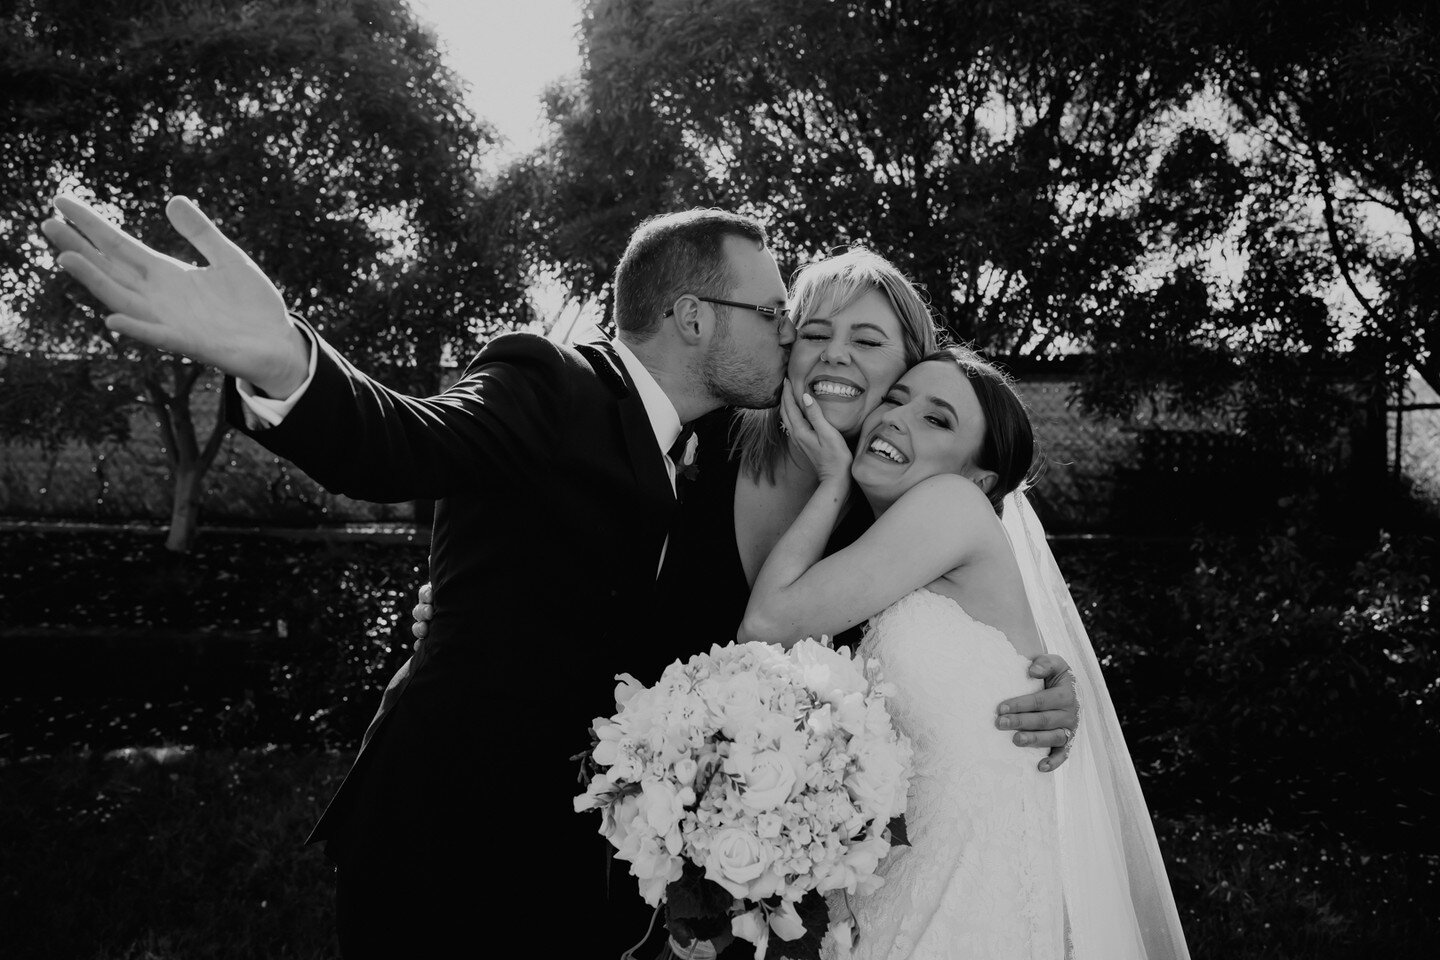 Lorenzo and Ashleigh - a perfect mix of true altruism, razor sharp wit and general cuteness.
Thanks for the post married squish!

Photo: @lovebombphotos 

Lovely team ~
Video: @analog_modern 
Venue: @vinesoftheyarravalley 
MUA: @loveco_beauty 
Cake: 